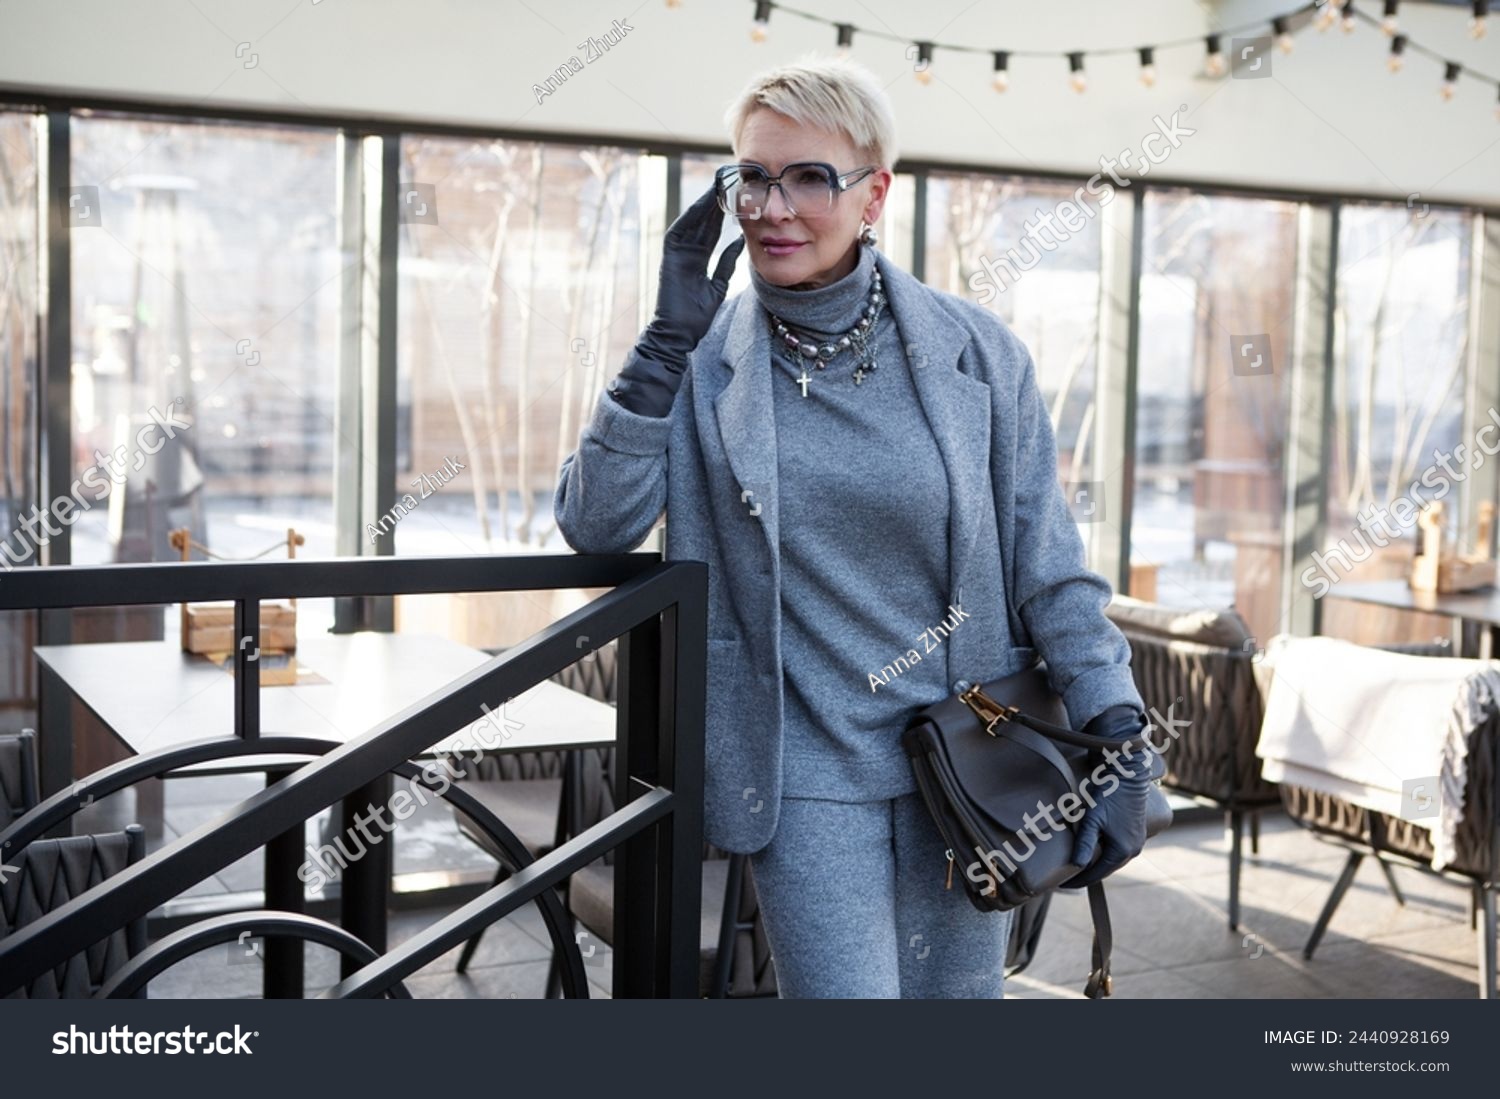 Attractive and stylish mature woman in grey pant suit with jacket and turtleneck, accessorized with handbag. The perfect look for successful women over 50. #2440928169